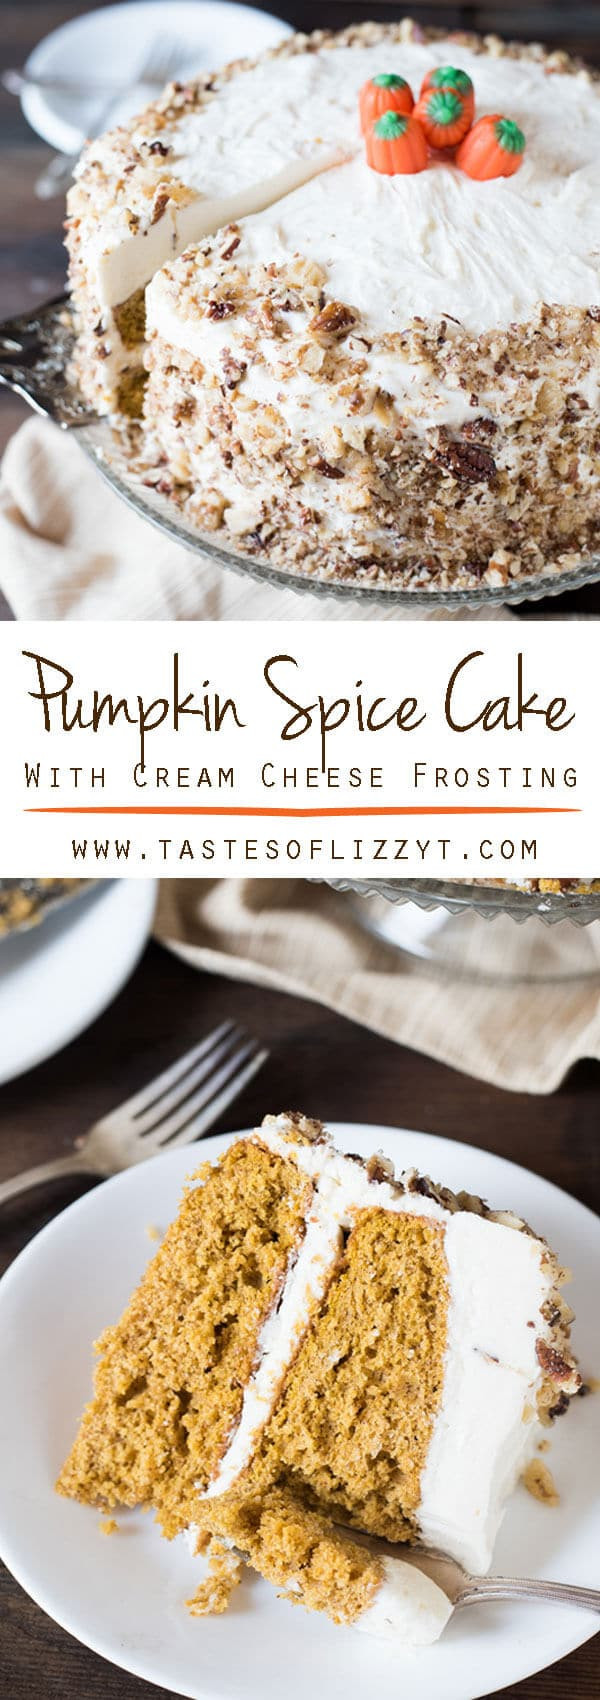 Spice Cake Frosting
 Pumpkin Spice Cake with Cream Cheese Frosting